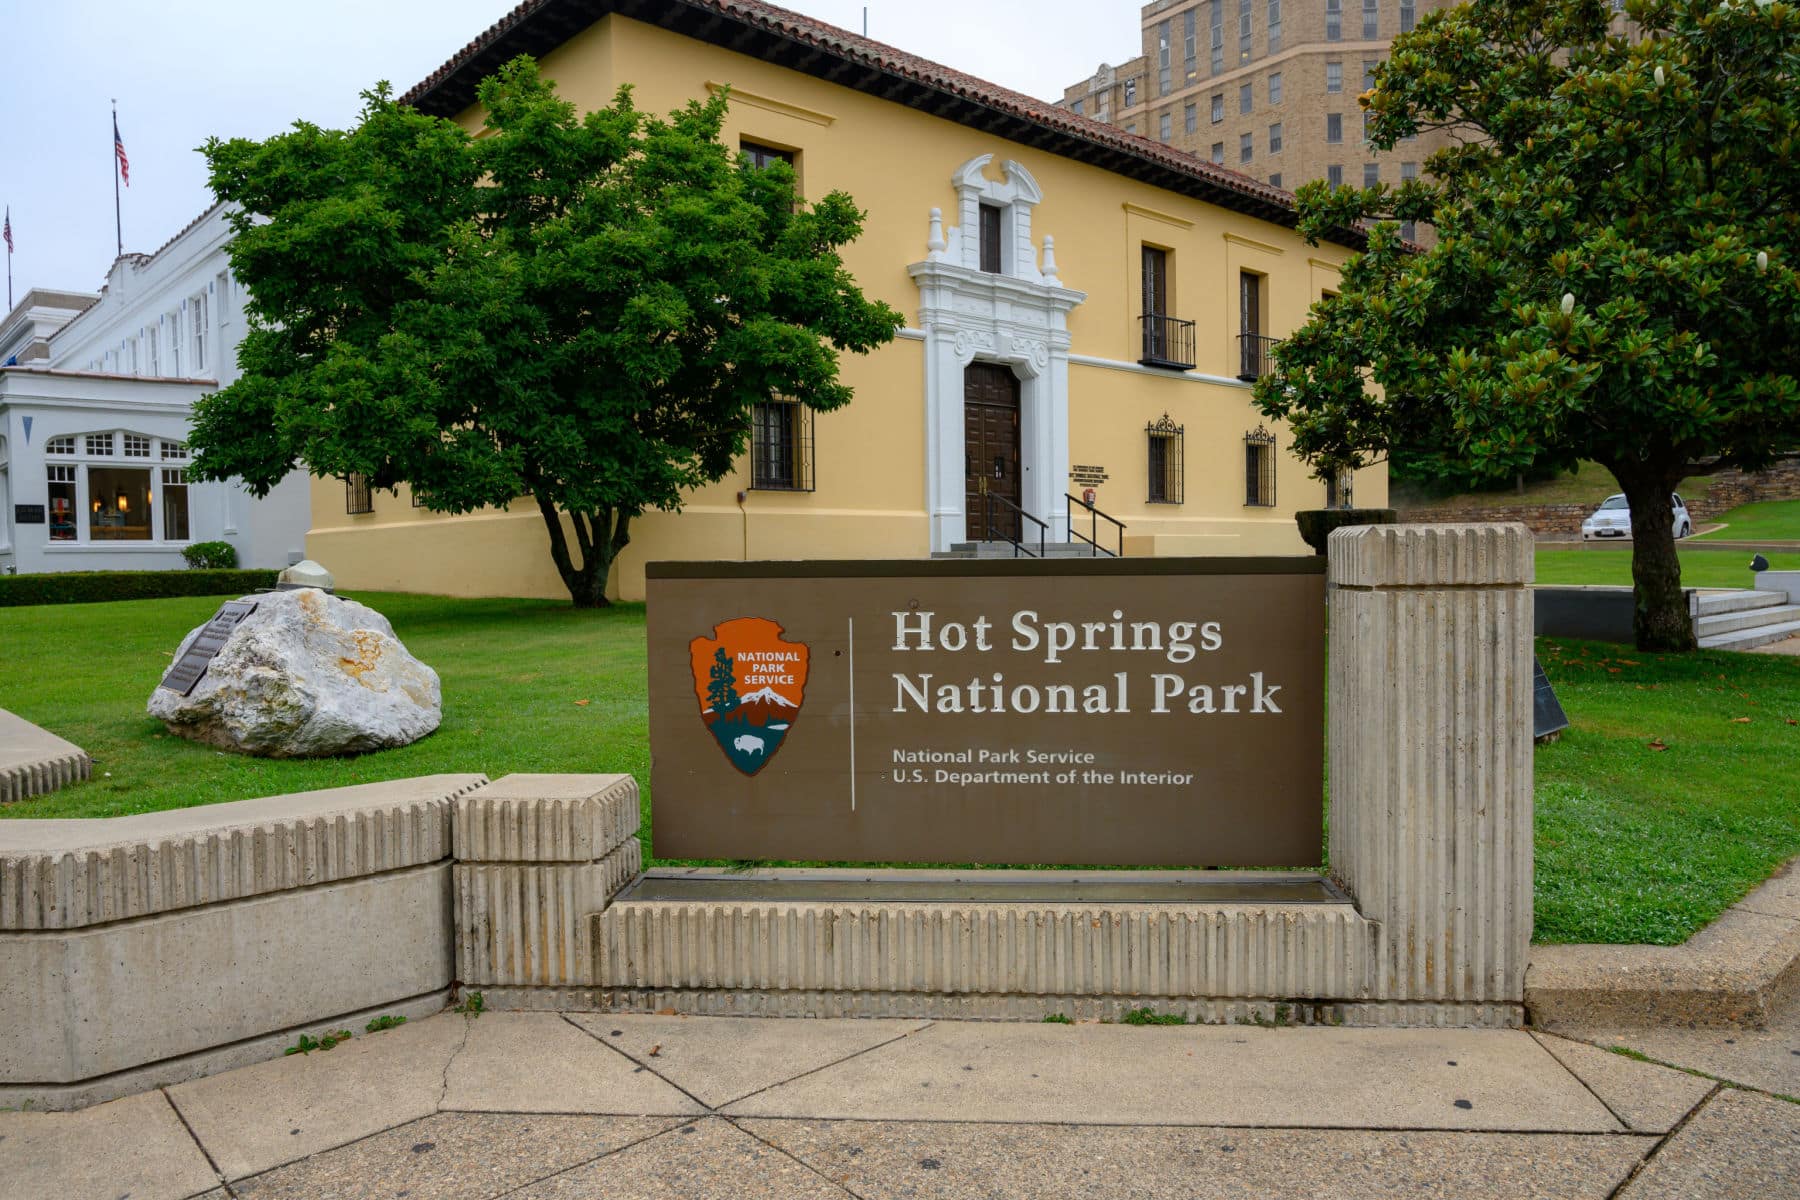 Hot Springs National Park Facts